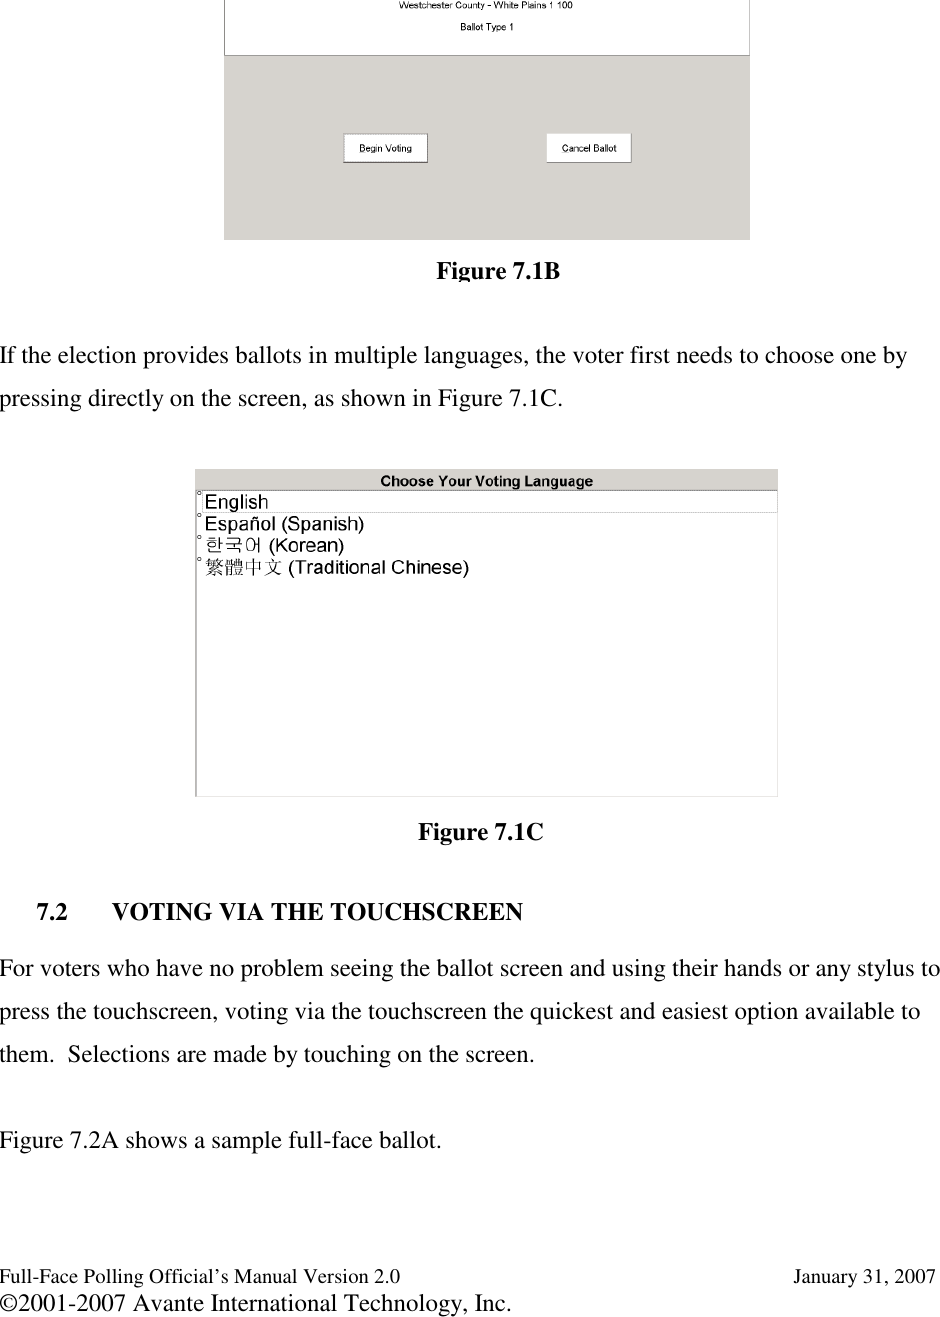 Full-Face Polling Official’s Manual Version 2.0 January 31, 2007©2001-2007 Avante International Technology, Inc.If the election provides ballots in multiple languages, the voter first needs to choose one bypressing directly on the screen, as shown in Figure 7.1C.7.2 VOTING VIA THE TOUCHSCREENFor voters who have no problem seeing the ballot screen and using their hands or any stylus topress the touchscreen, voting via the touchscreen the quickest and easiest option available tothem. Selections are made by touching on the screen.Figure 7.2A shows a sample full-face ballot.Figure 7.1CFigure 7.1B